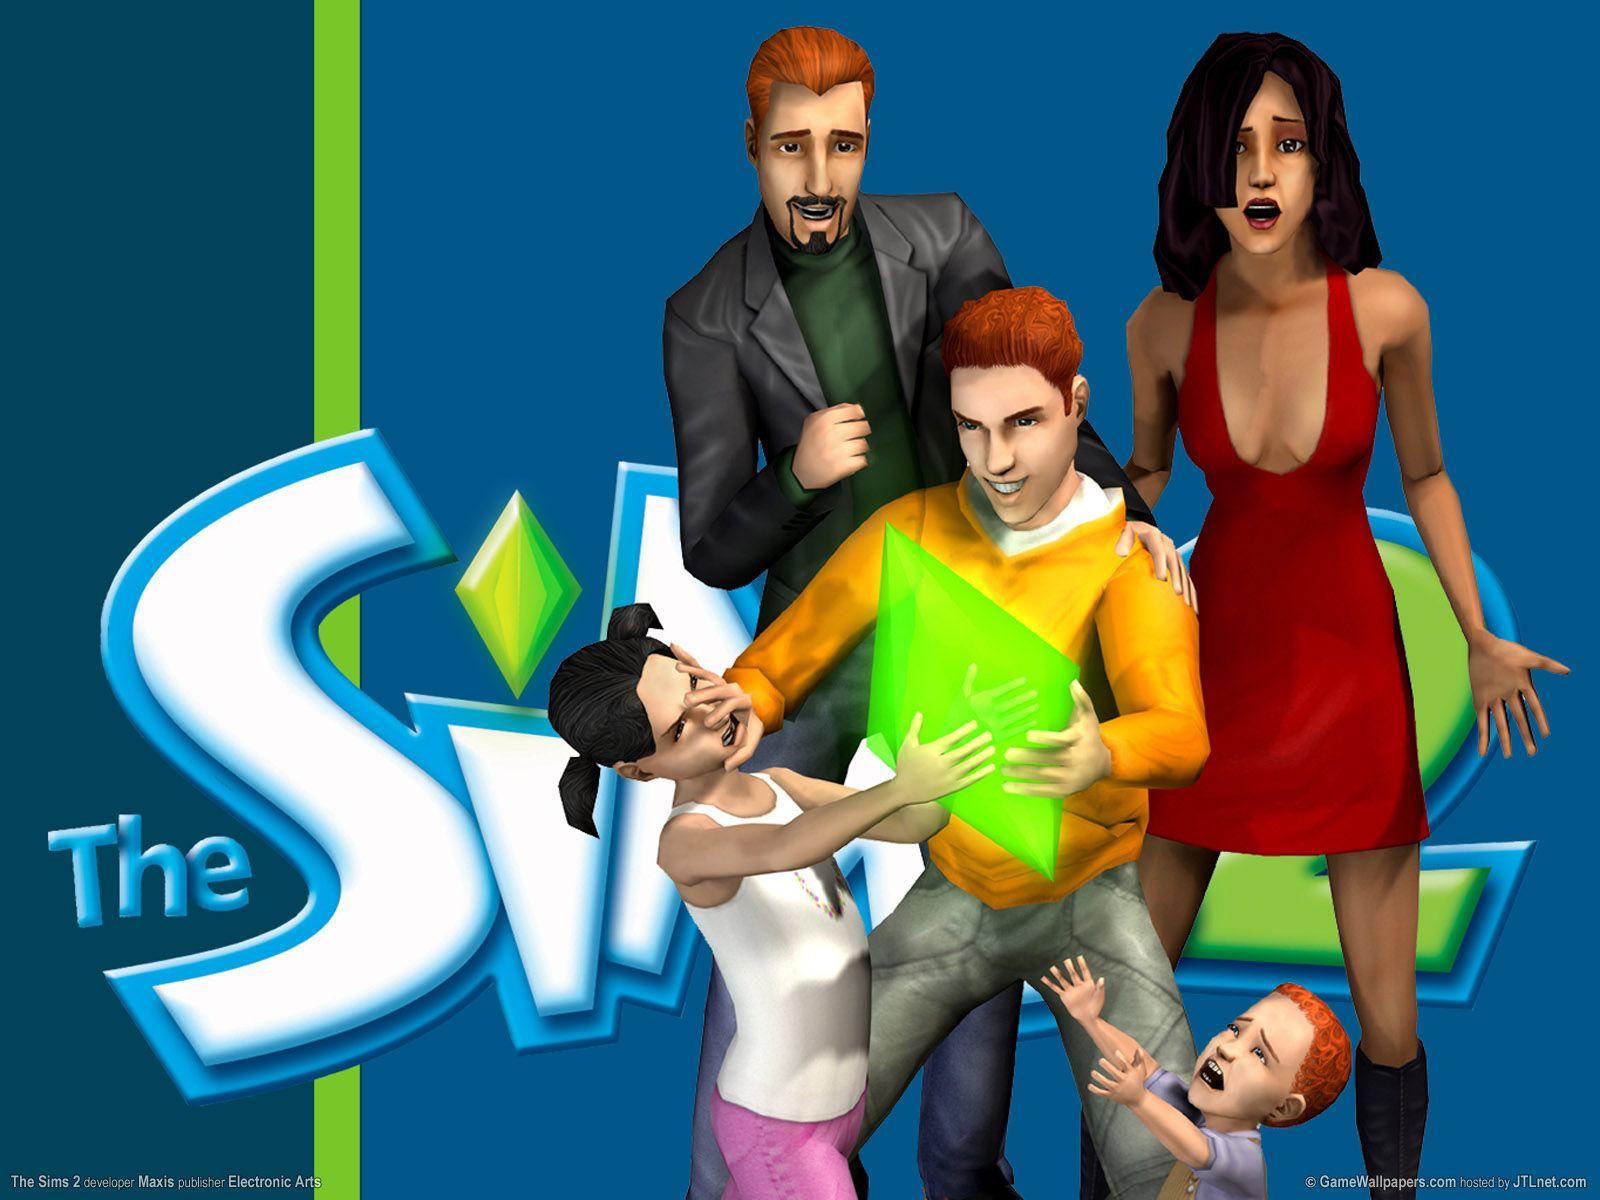 Wallpaper blue, The Sims The Sims 2